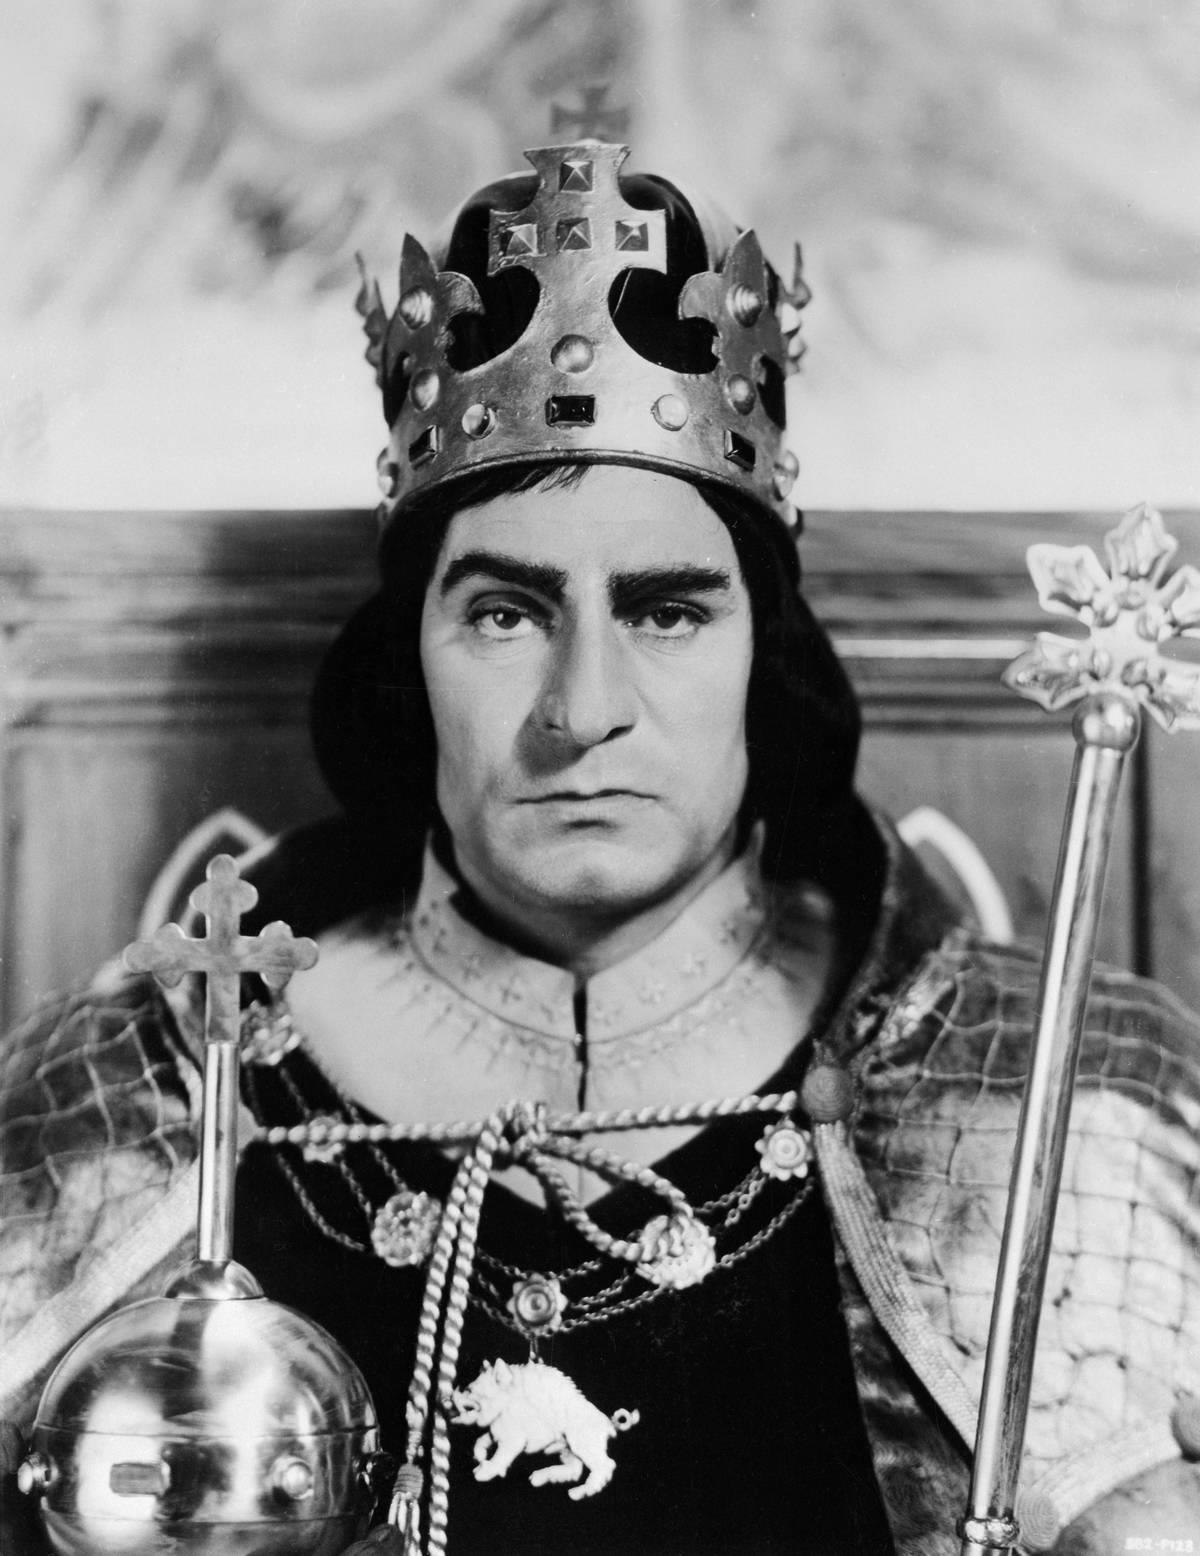 <p><i>Richard III</i> is a 1955 screen adaptation based on the Shakespeare play of the same name. The film incorporates most of its dialogue directly from the play into the script, written, directed, and starring Laurence Olivier. </p> <p>A convincing replication of battles like the Battle of Bosworth Field and Olivier suffering an arrow wound during filming adds to the movie's medieval setting. </p>